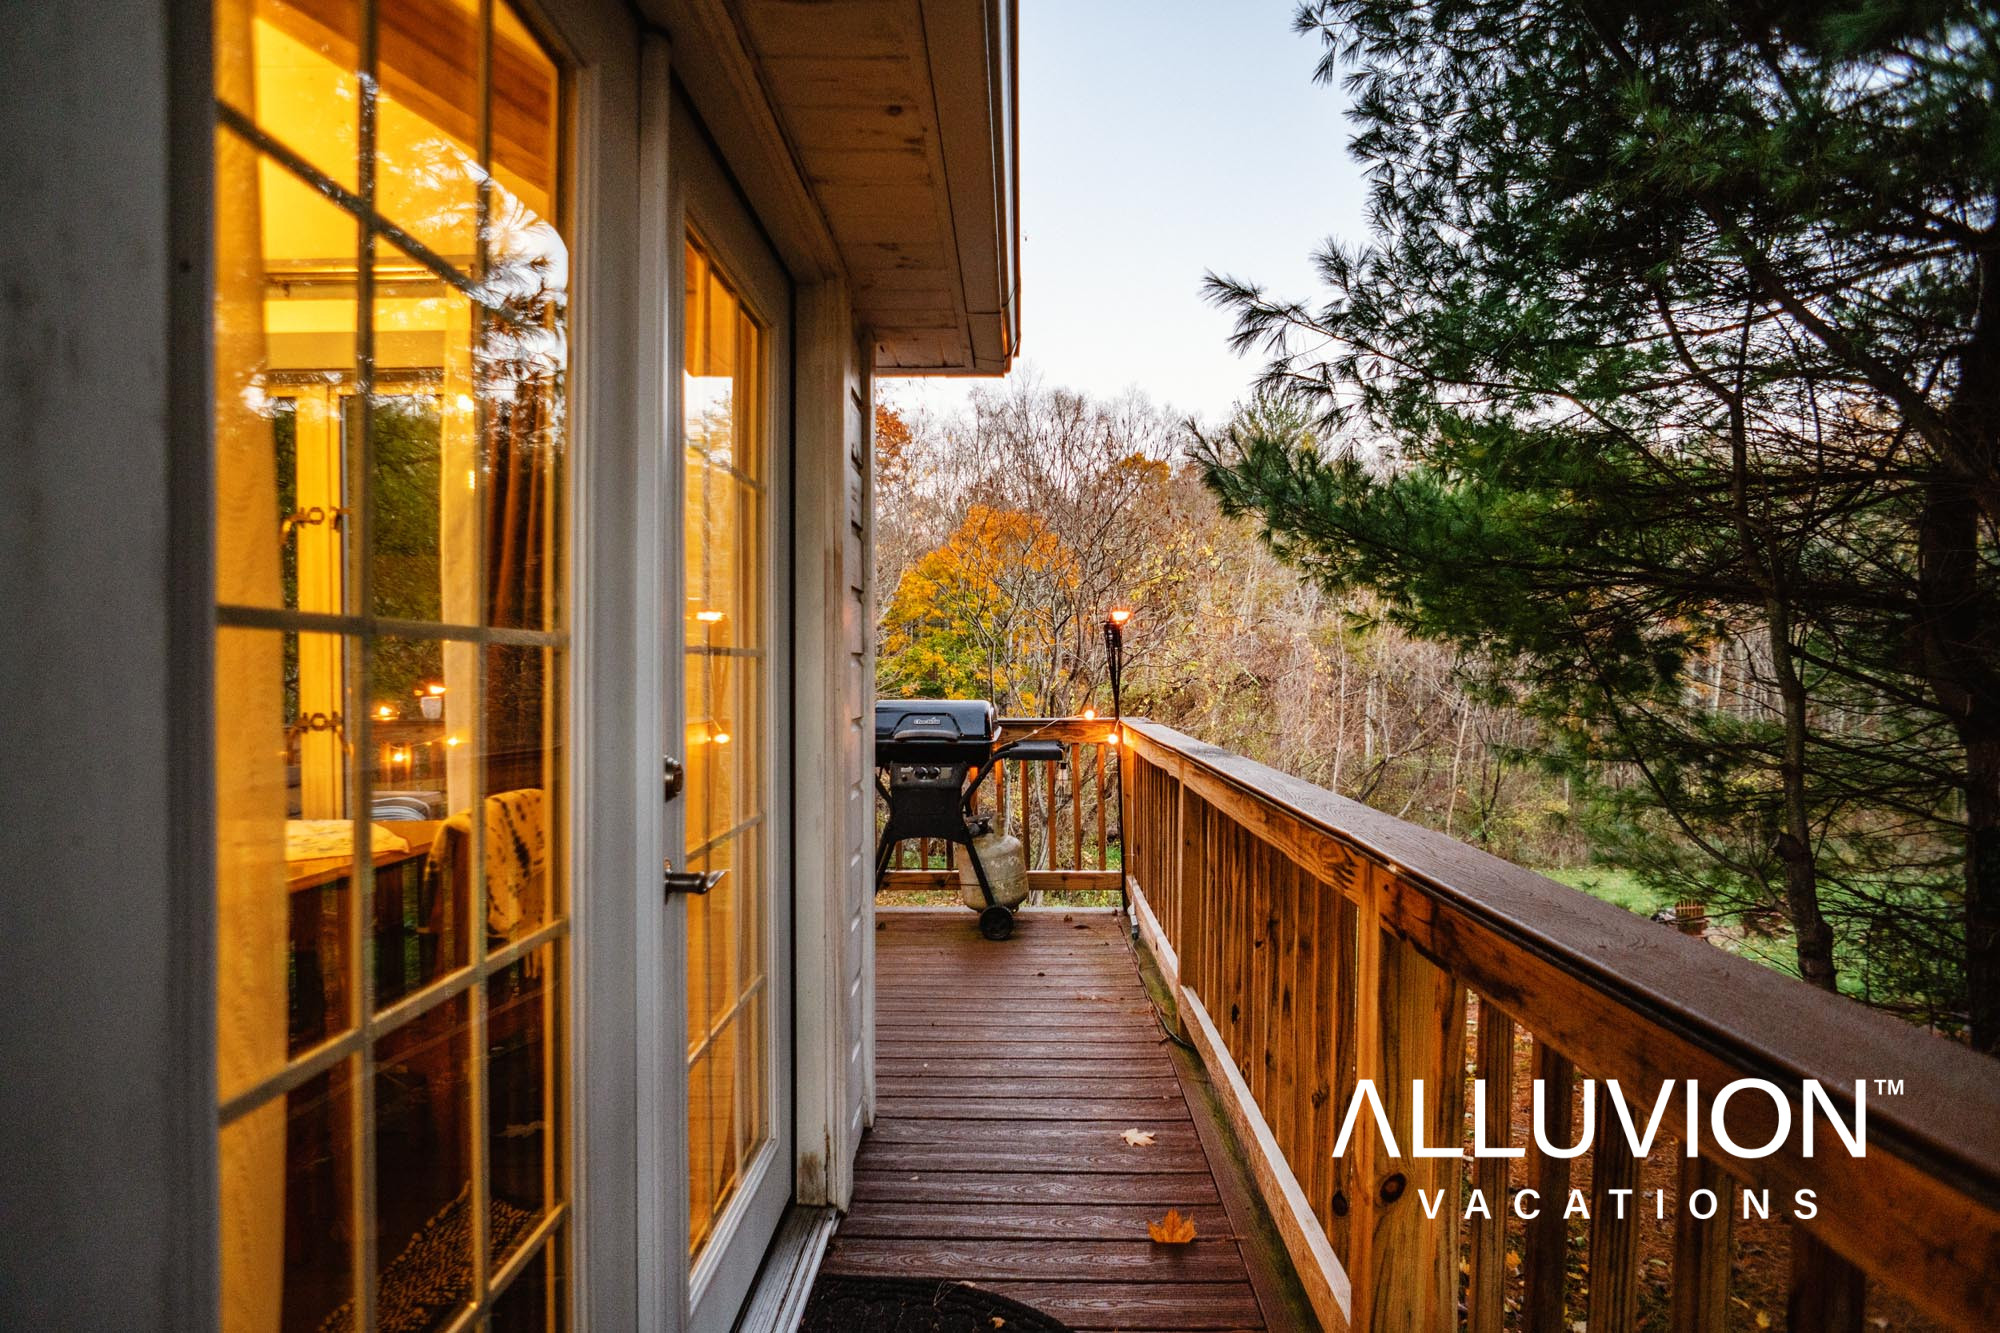 Escape to the Catskills in this Quaint and Cozy Tiny Cabin – Airbnb Cabin for Rent by Alluvion Vacations